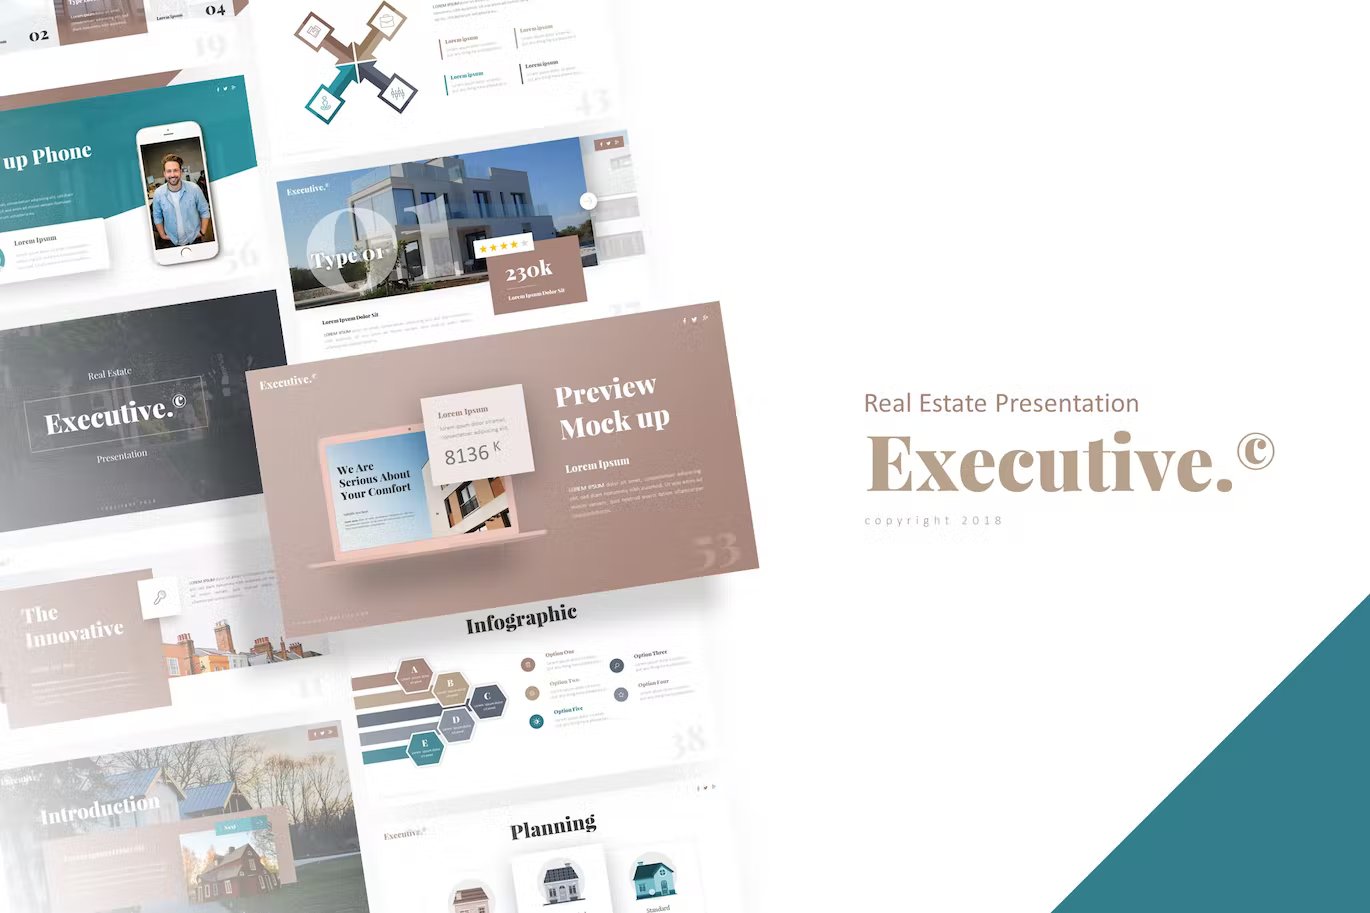 Beige lettering "Real Estate Presentation Executive." and different presentation templates on a white background.